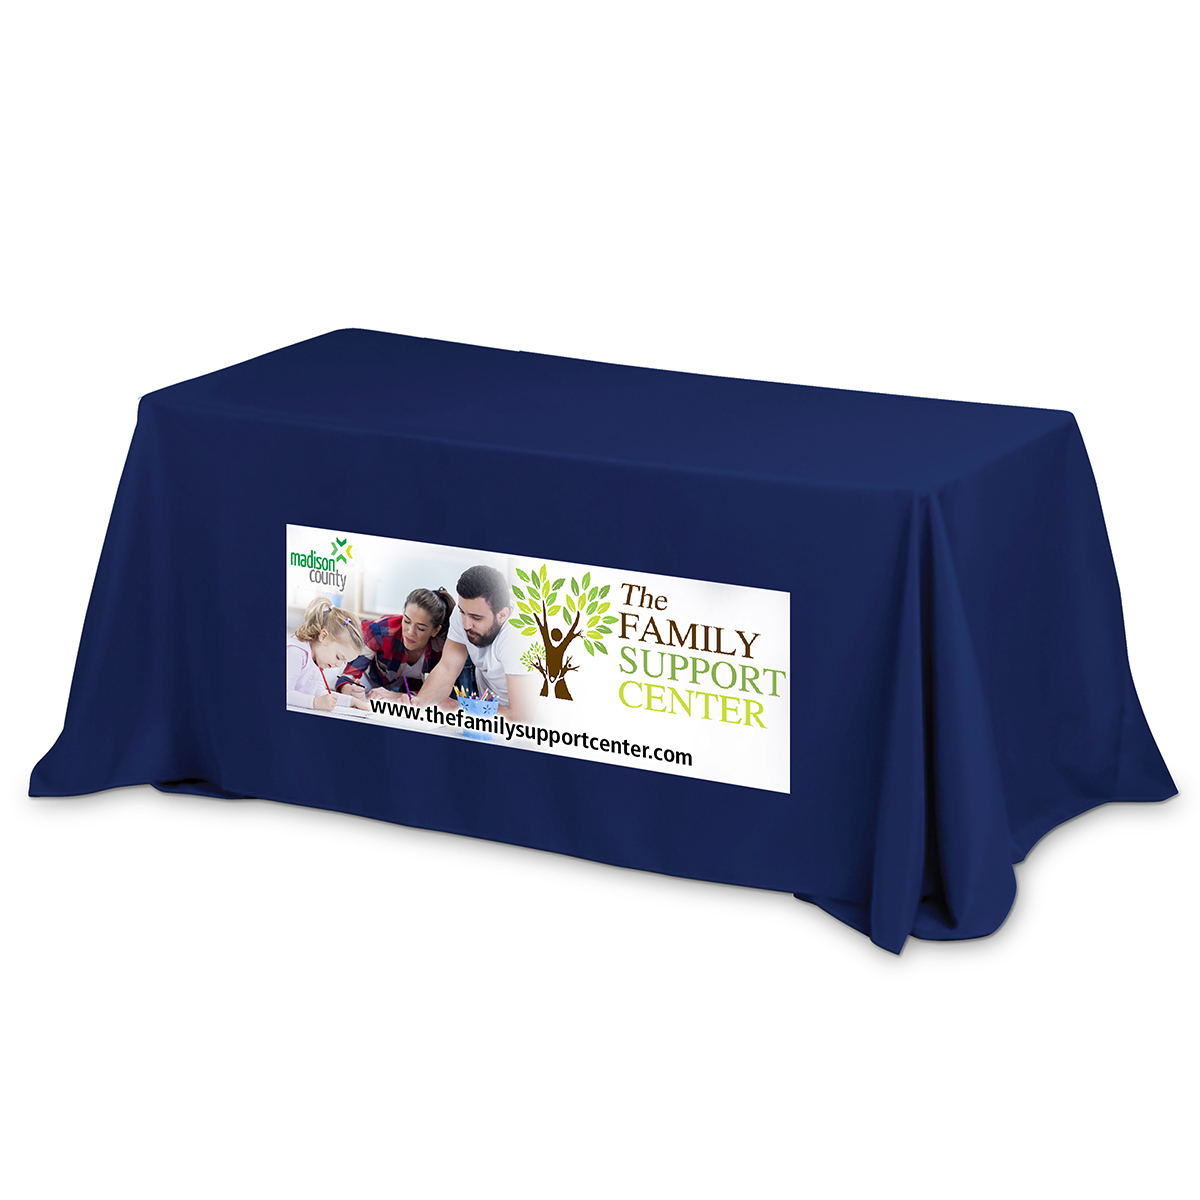 "PREAKNESS SIX" Fits 6 ft Table 3-Sided Economy Table Covers & Table Throws (PhotoImage Full Color)